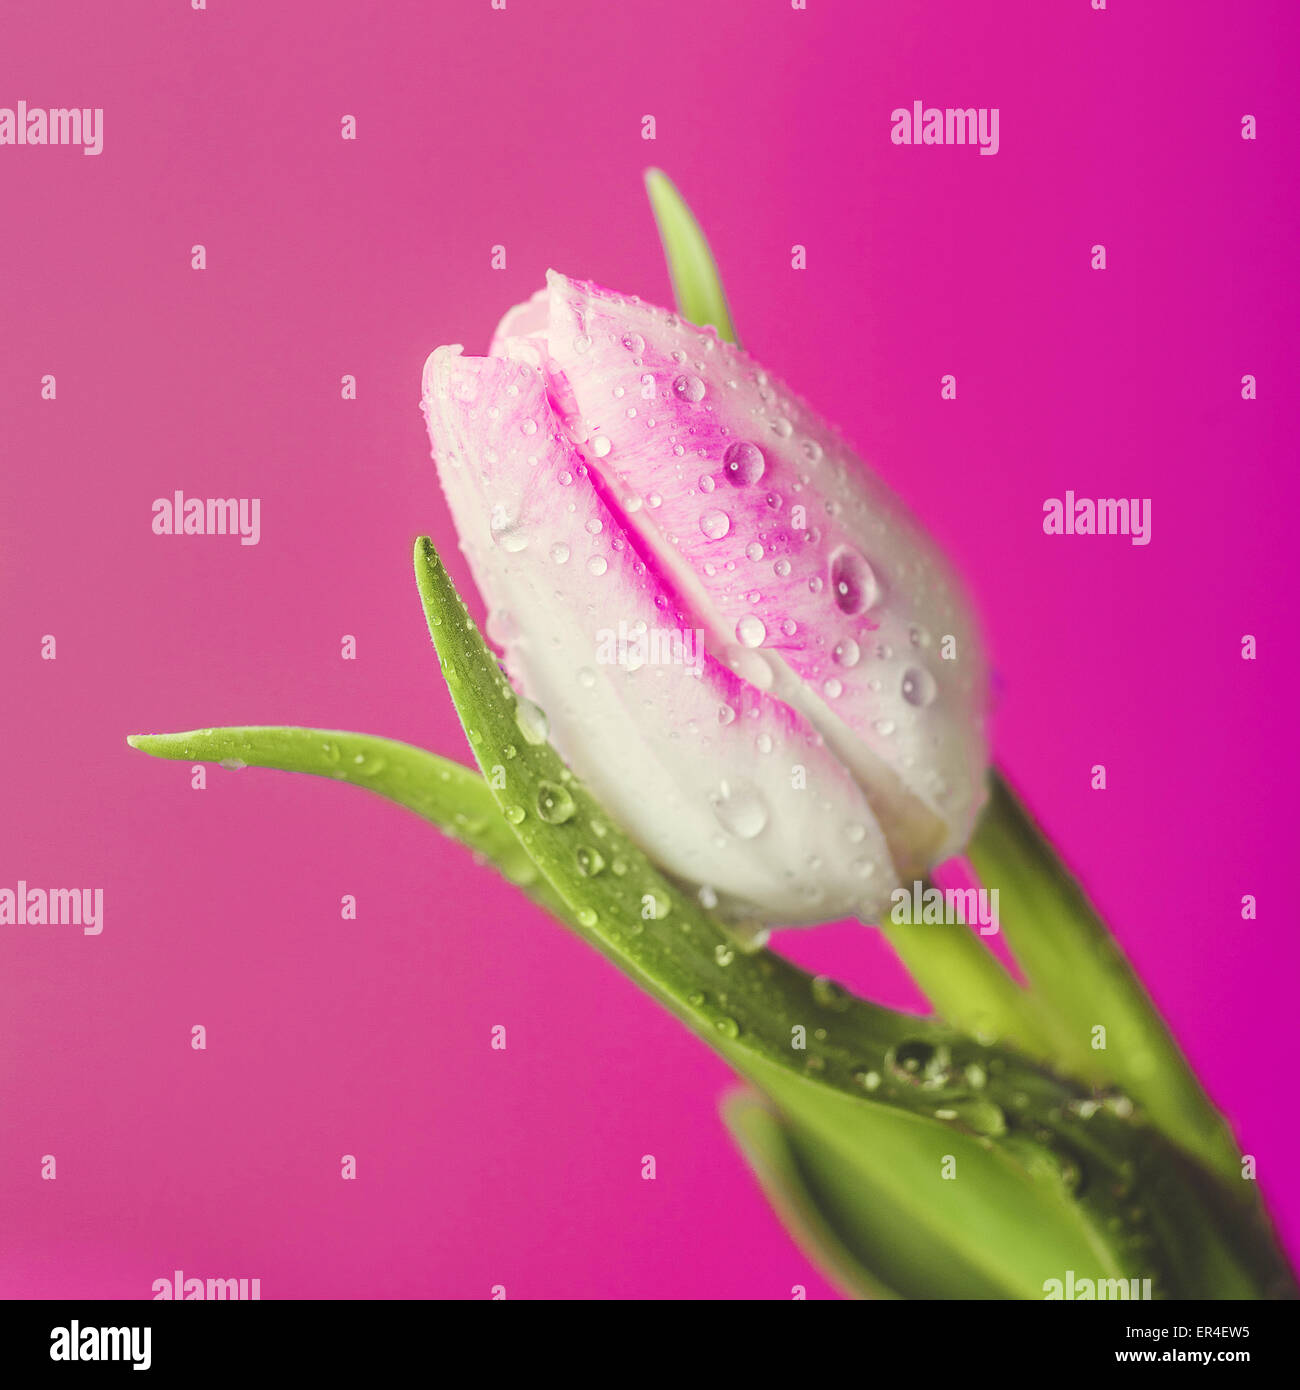 Tulip with water droplets against a pink backdrop Stock Photo